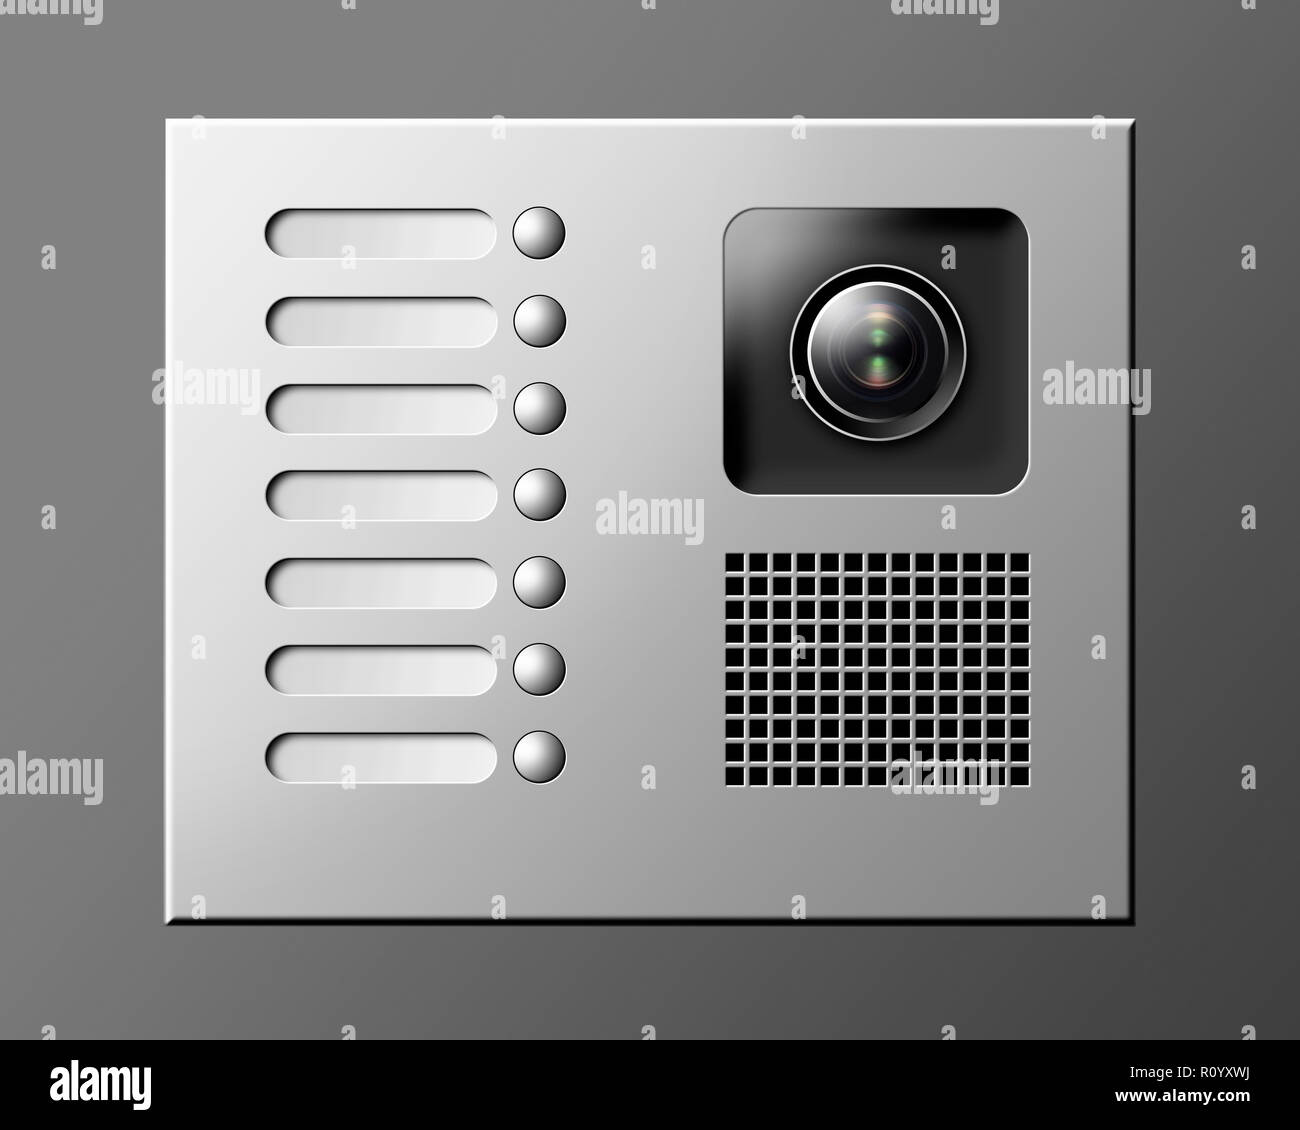 Doorbell panel with intercom system and security camera against grey background Stock Photo